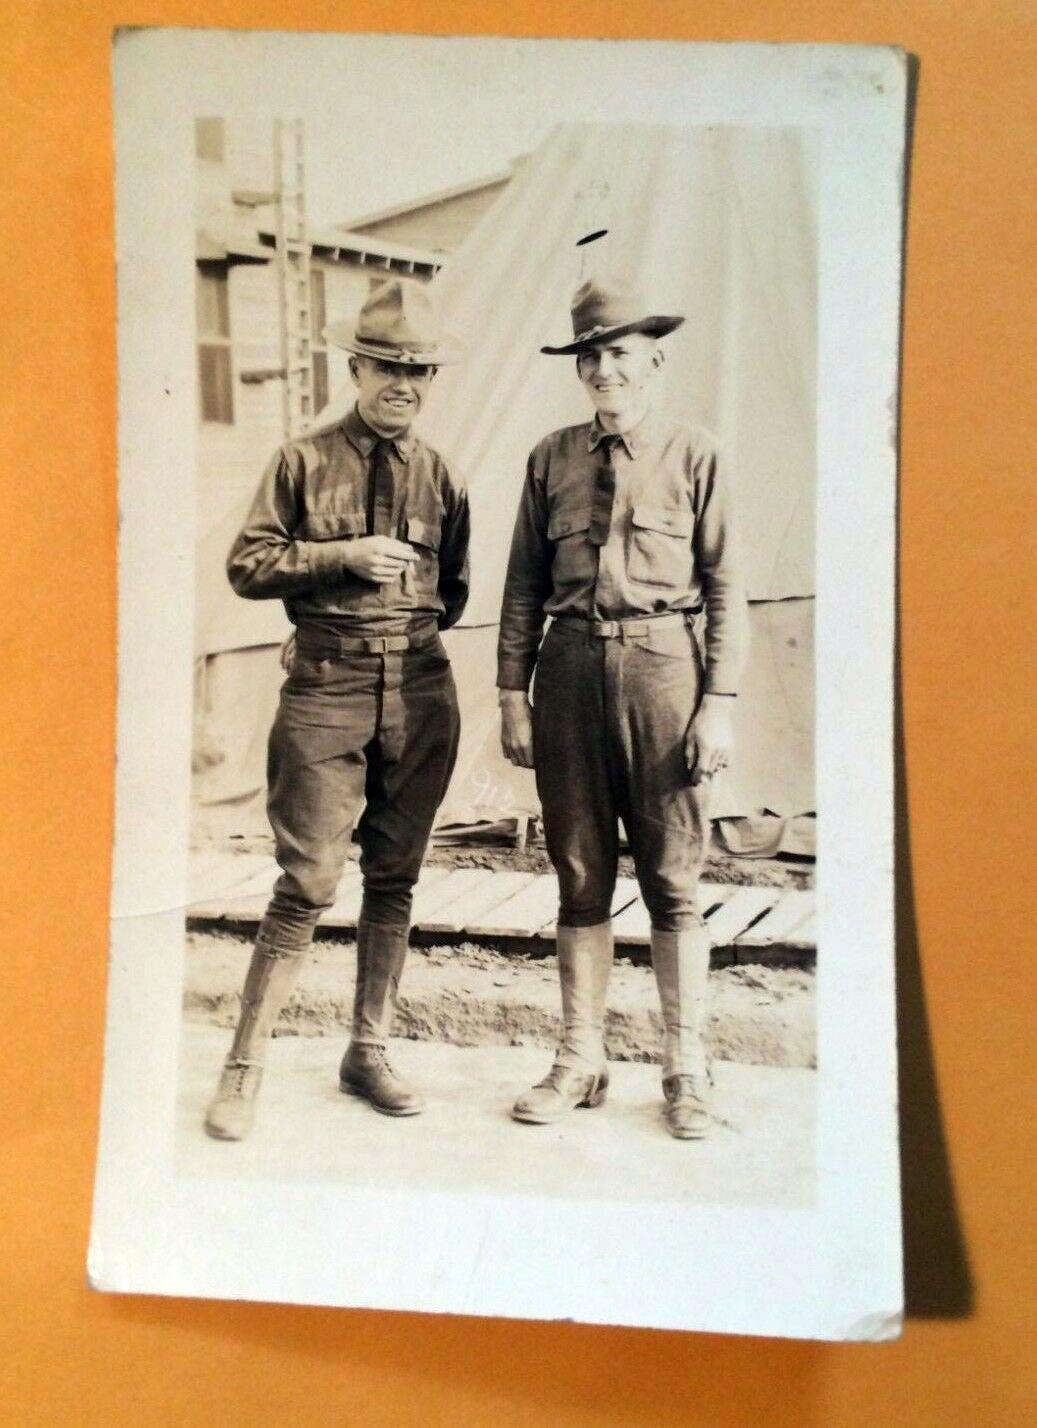 Camp Dix - Two soldiers - evidently hats were not yet uniform - 1917